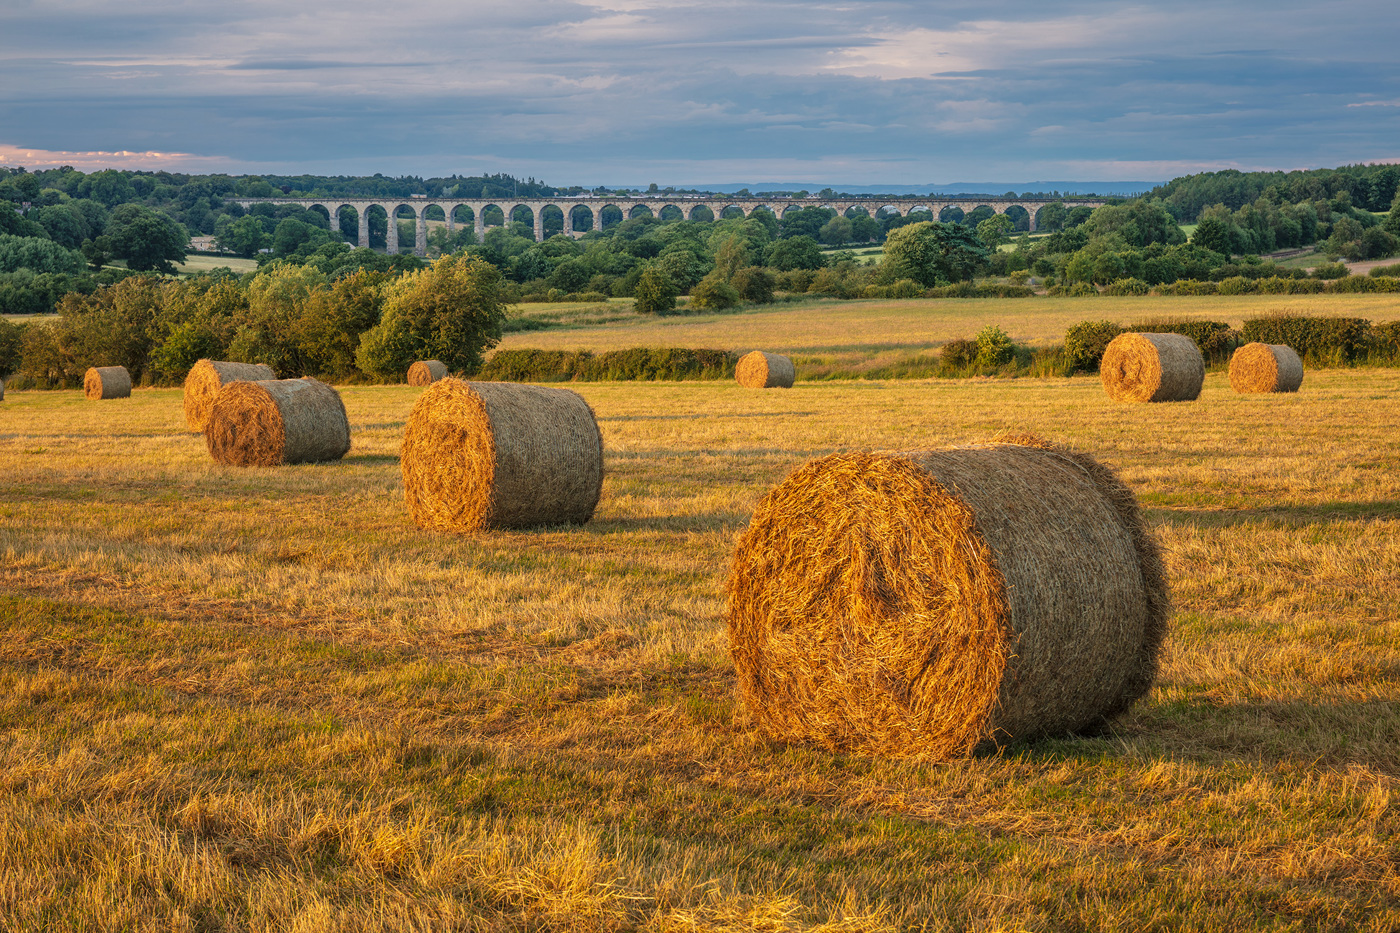 Hay bales with Crimple Viaduct in the distance a herd of sheep grazing on a dry grass field